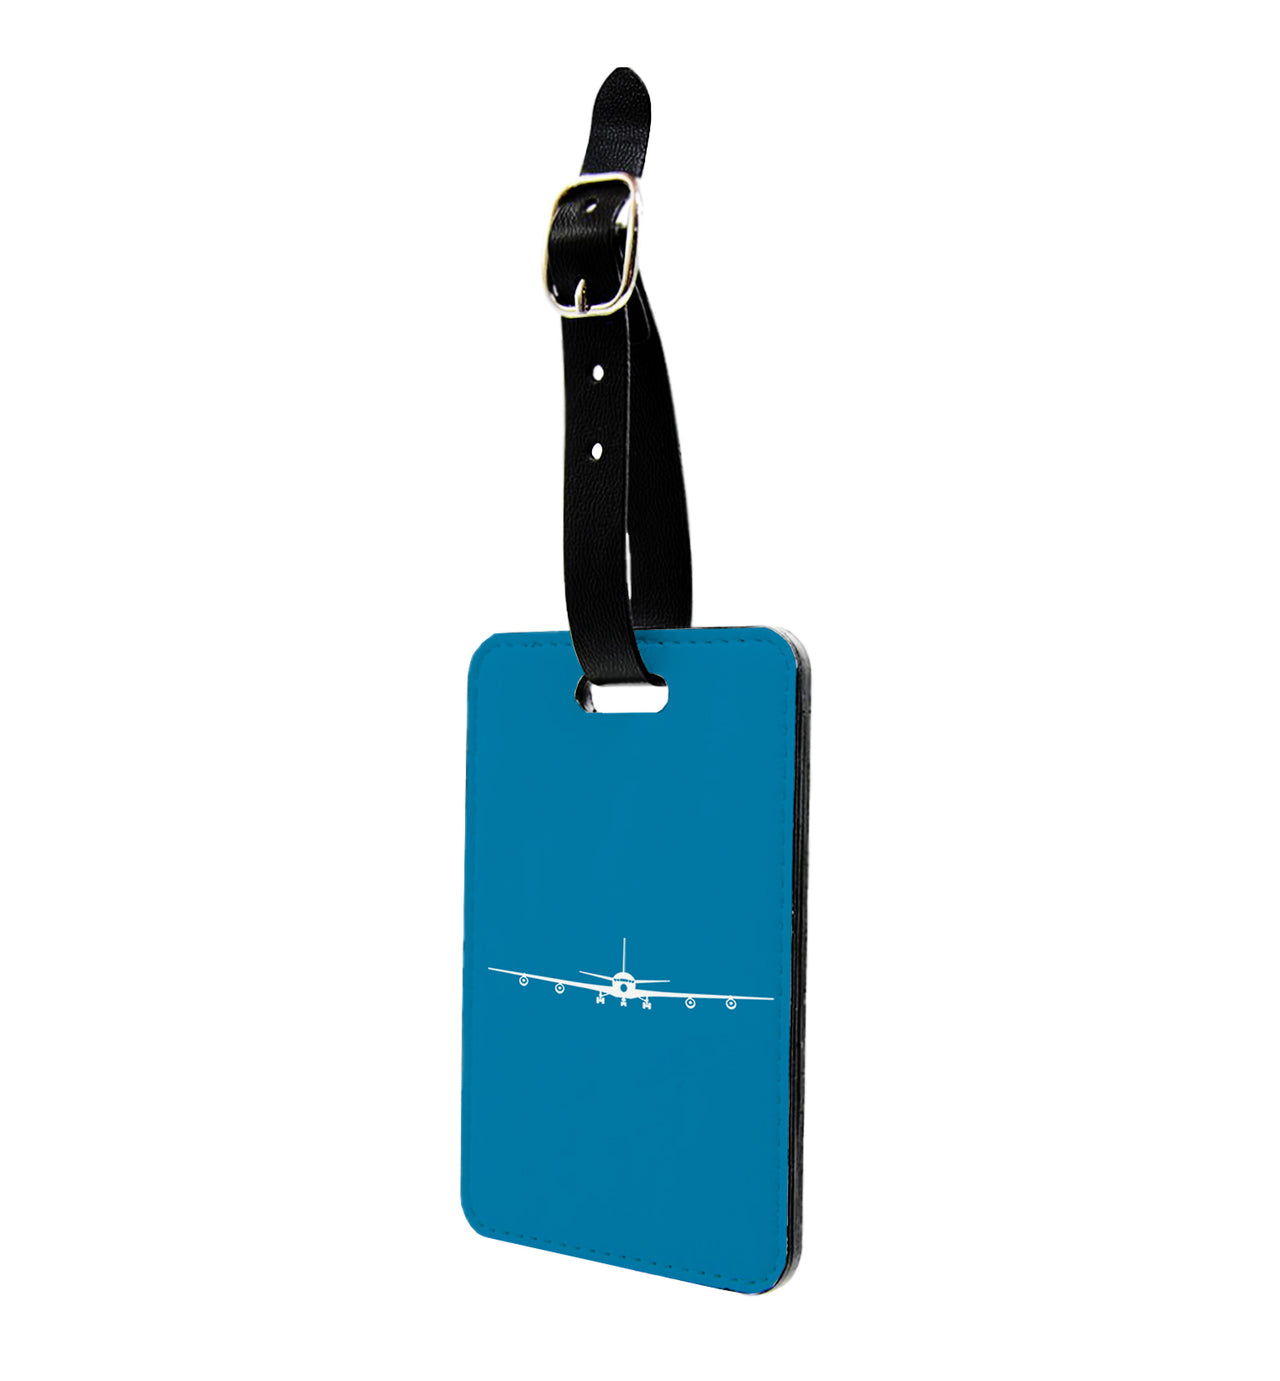 Boeing 707 Silhouette Designed Luggage Tag